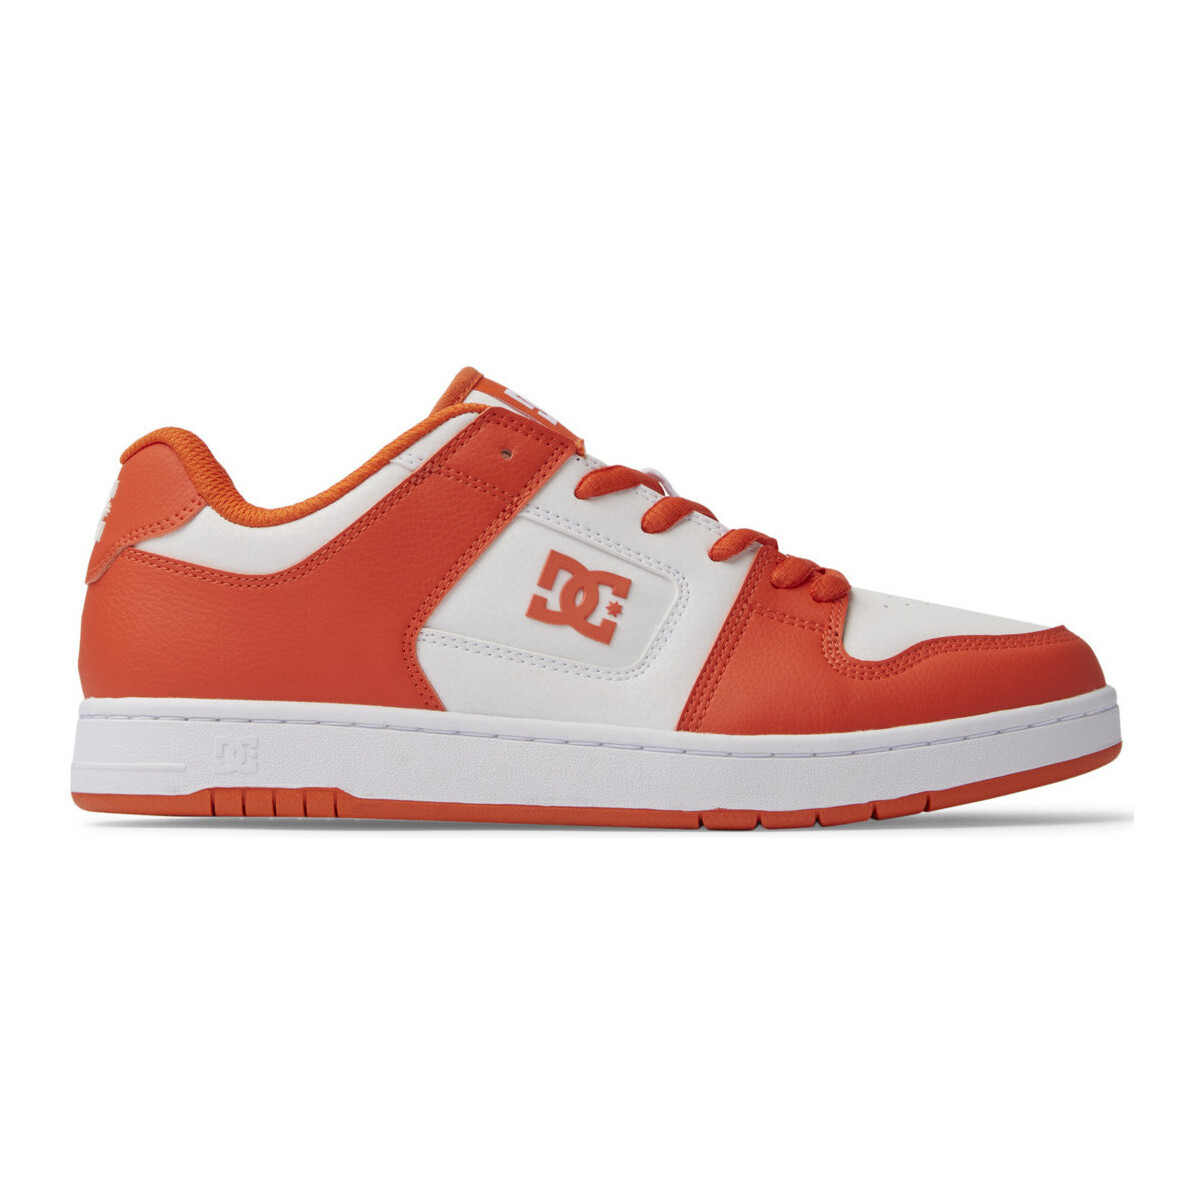 Chaussures Homme Chaussures de Skate DC Shoes Manteca 4 Sn Blanc